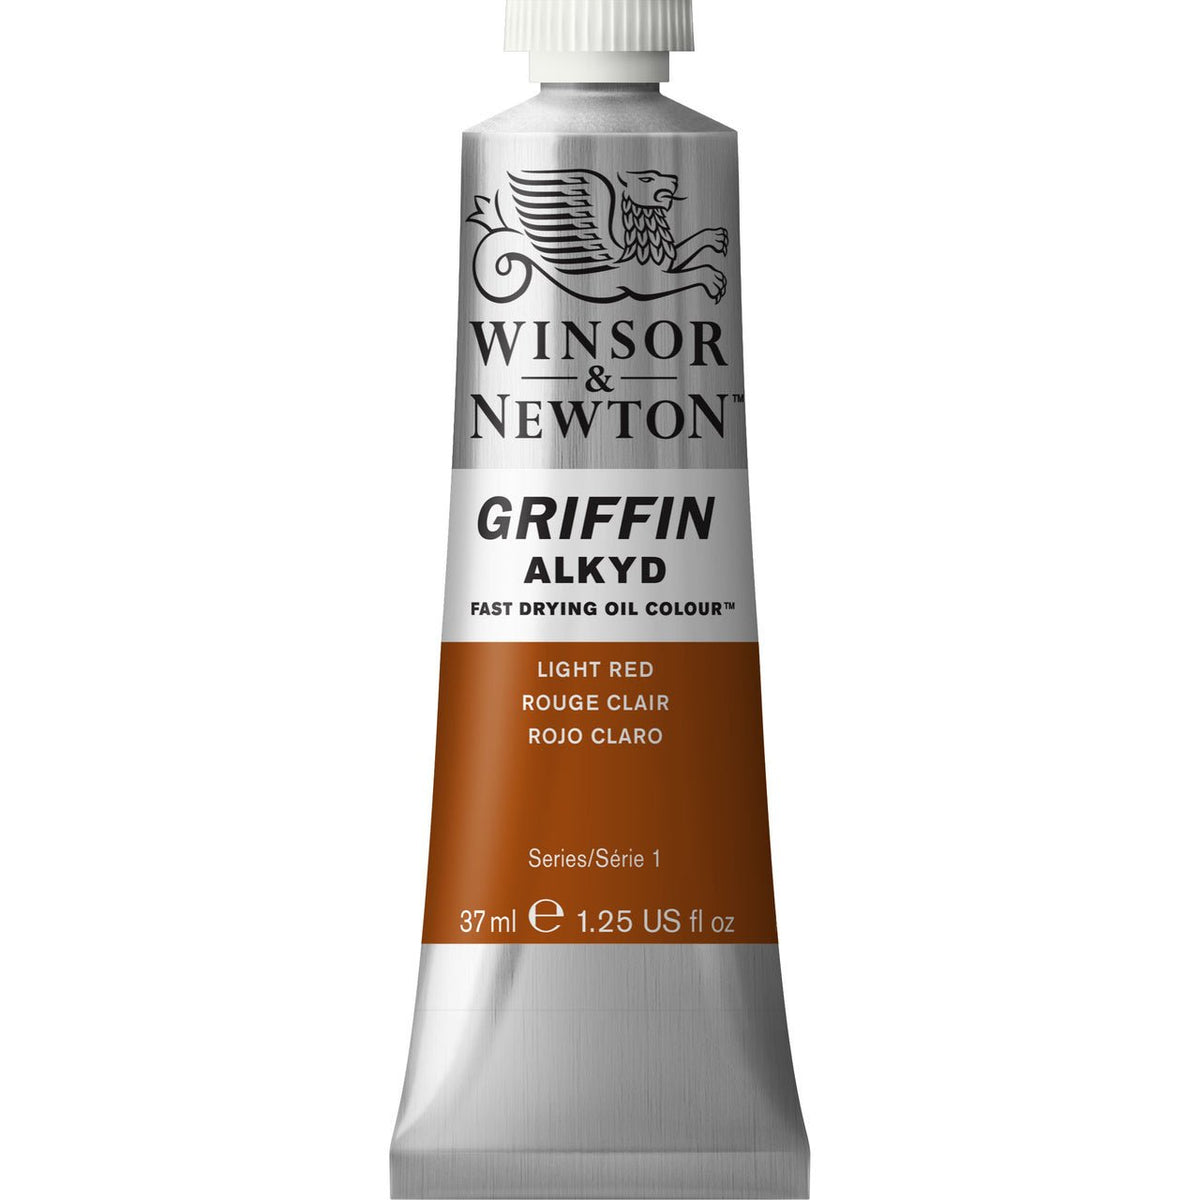 Winsor & Newton Griffin Alkyd 37ml Light Red - merriartist.com